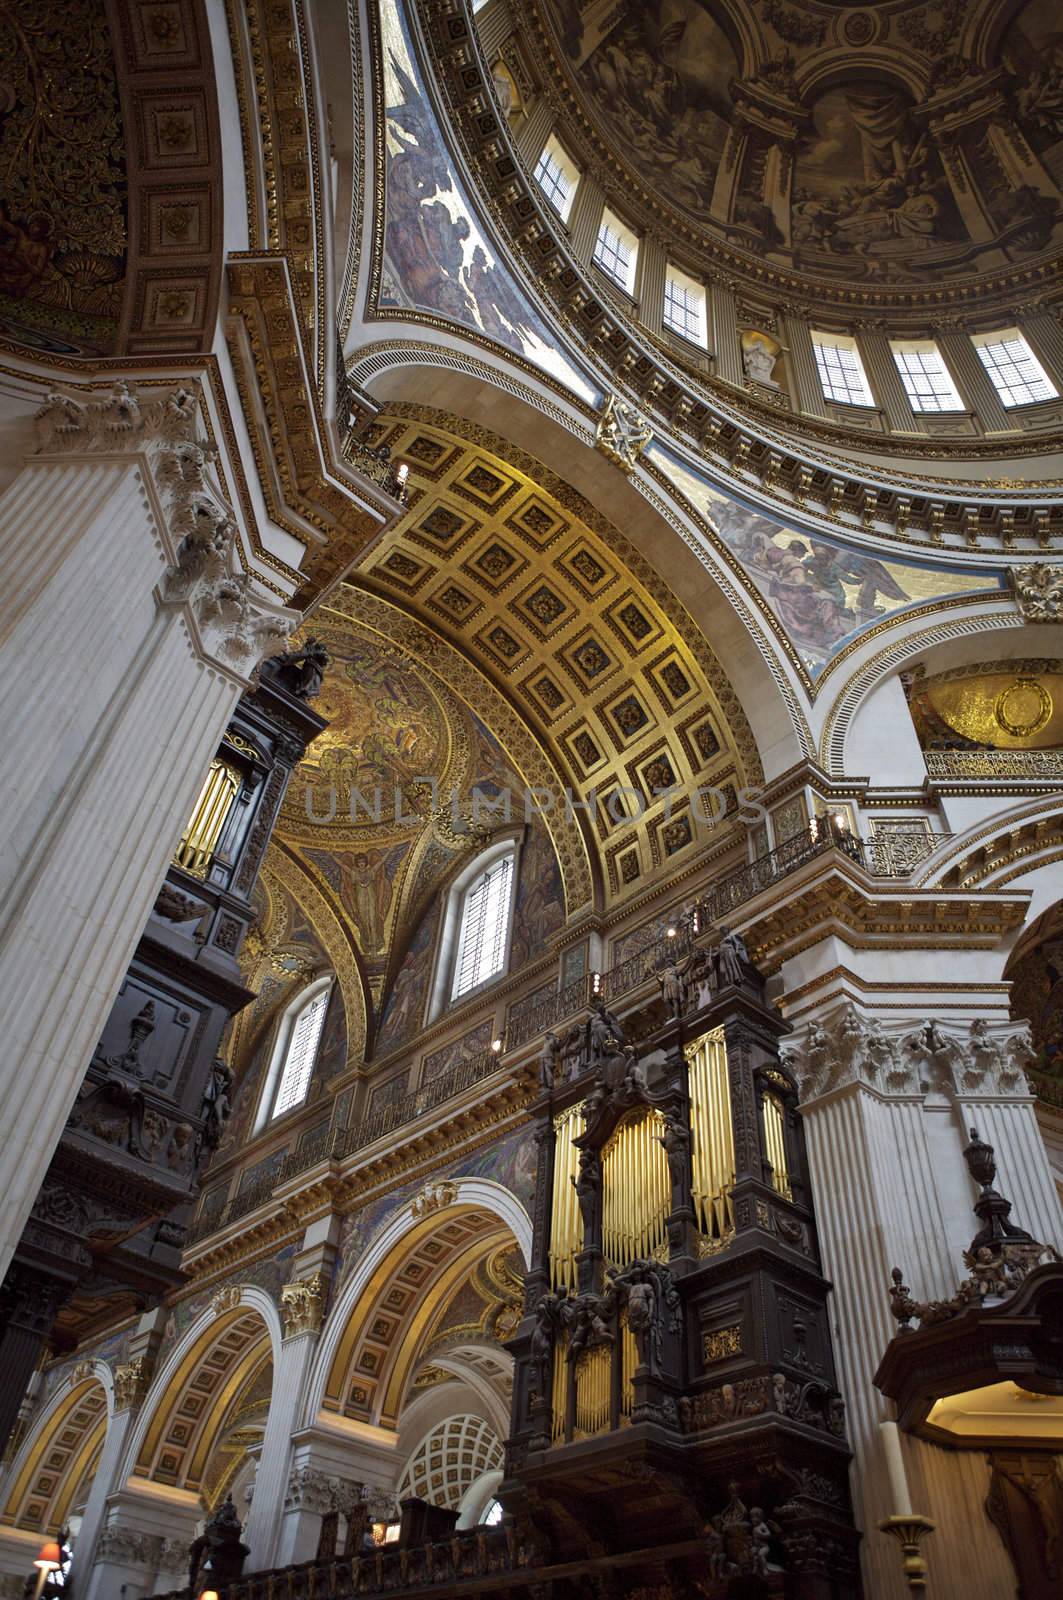 Church interior of St Paul's in London by instinia